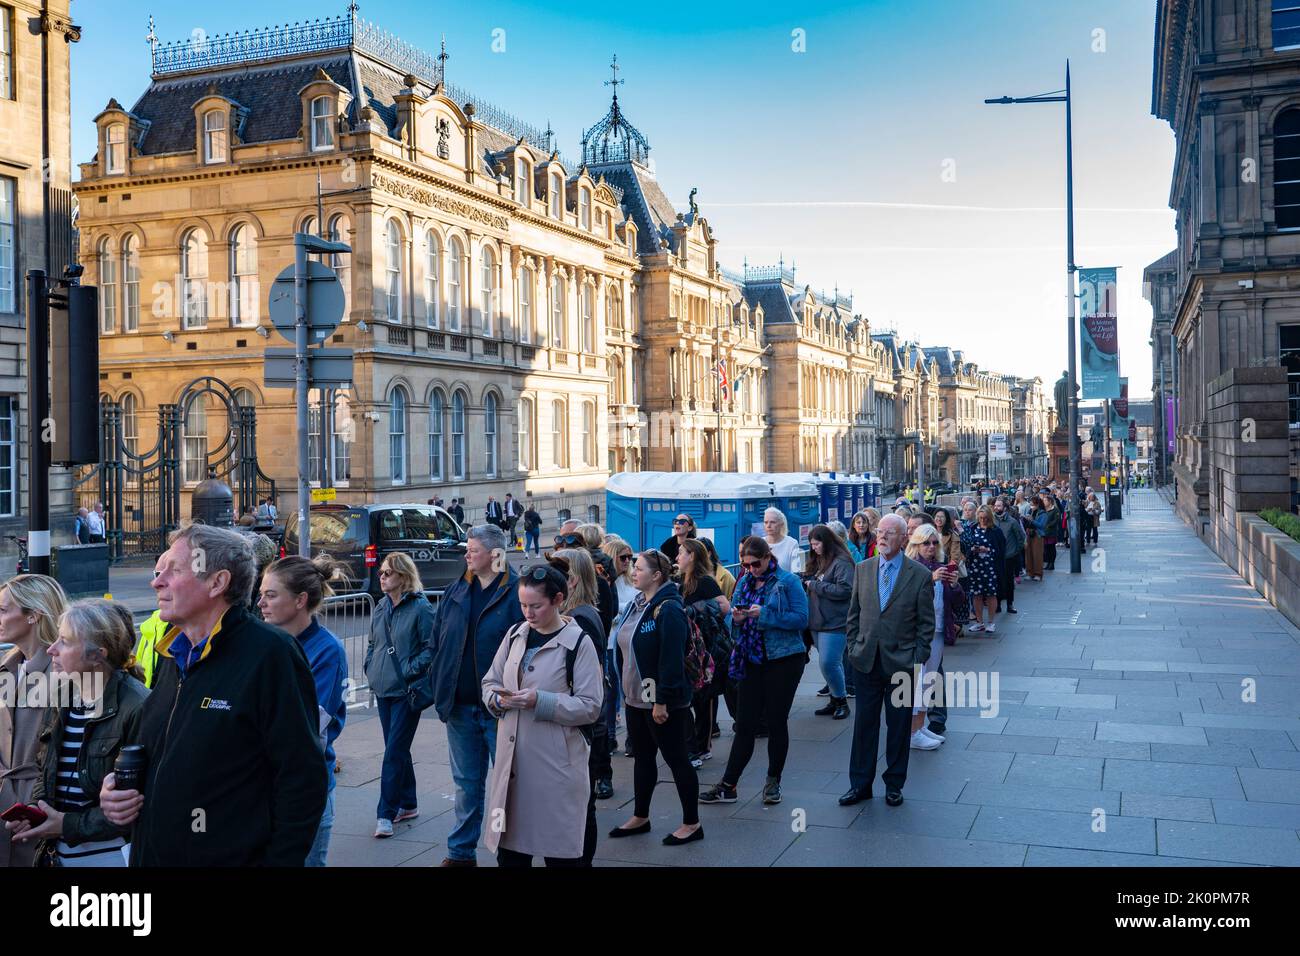 Edinburgh, Scotland, UK. 13th September 2022. Many members of the public queue to pay respects to Queen Elizabeth II who is resting inside St Giles Cathedral in Edinburgh  until returning to London this afternoon. Pic; Queue stretching along Chambers Street and into Bristo Square.   Iain Masterton/Alamy Live News Stock Photo